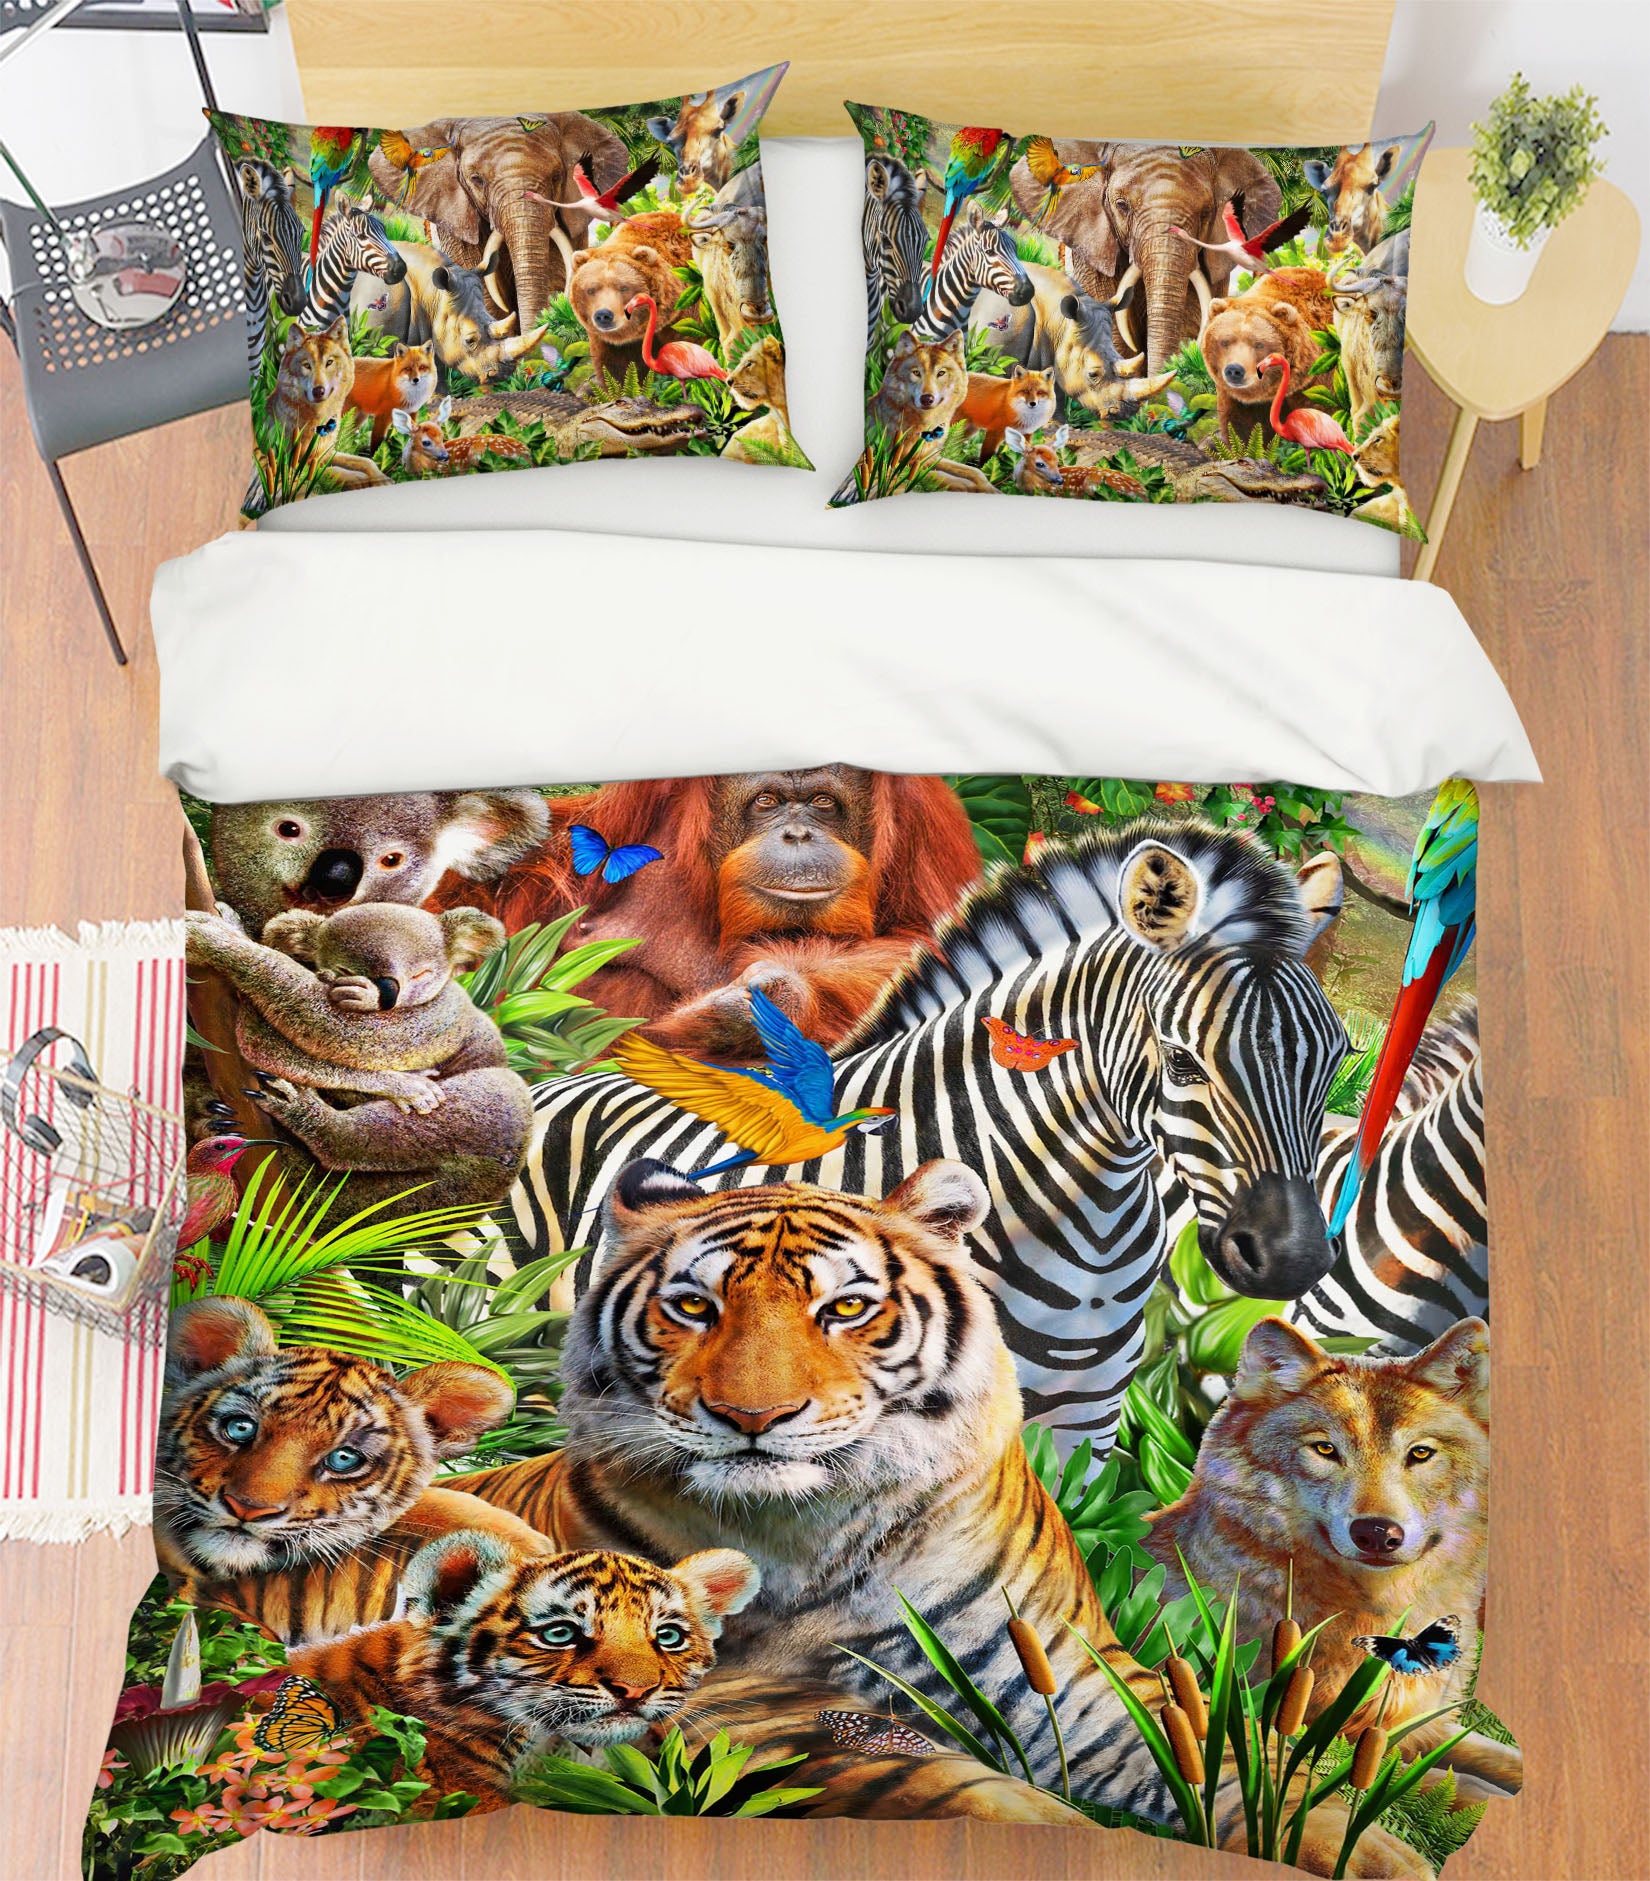 3D Animal World 2050 Adrian Chesterman Bedding Bed Pillowcases Quilt